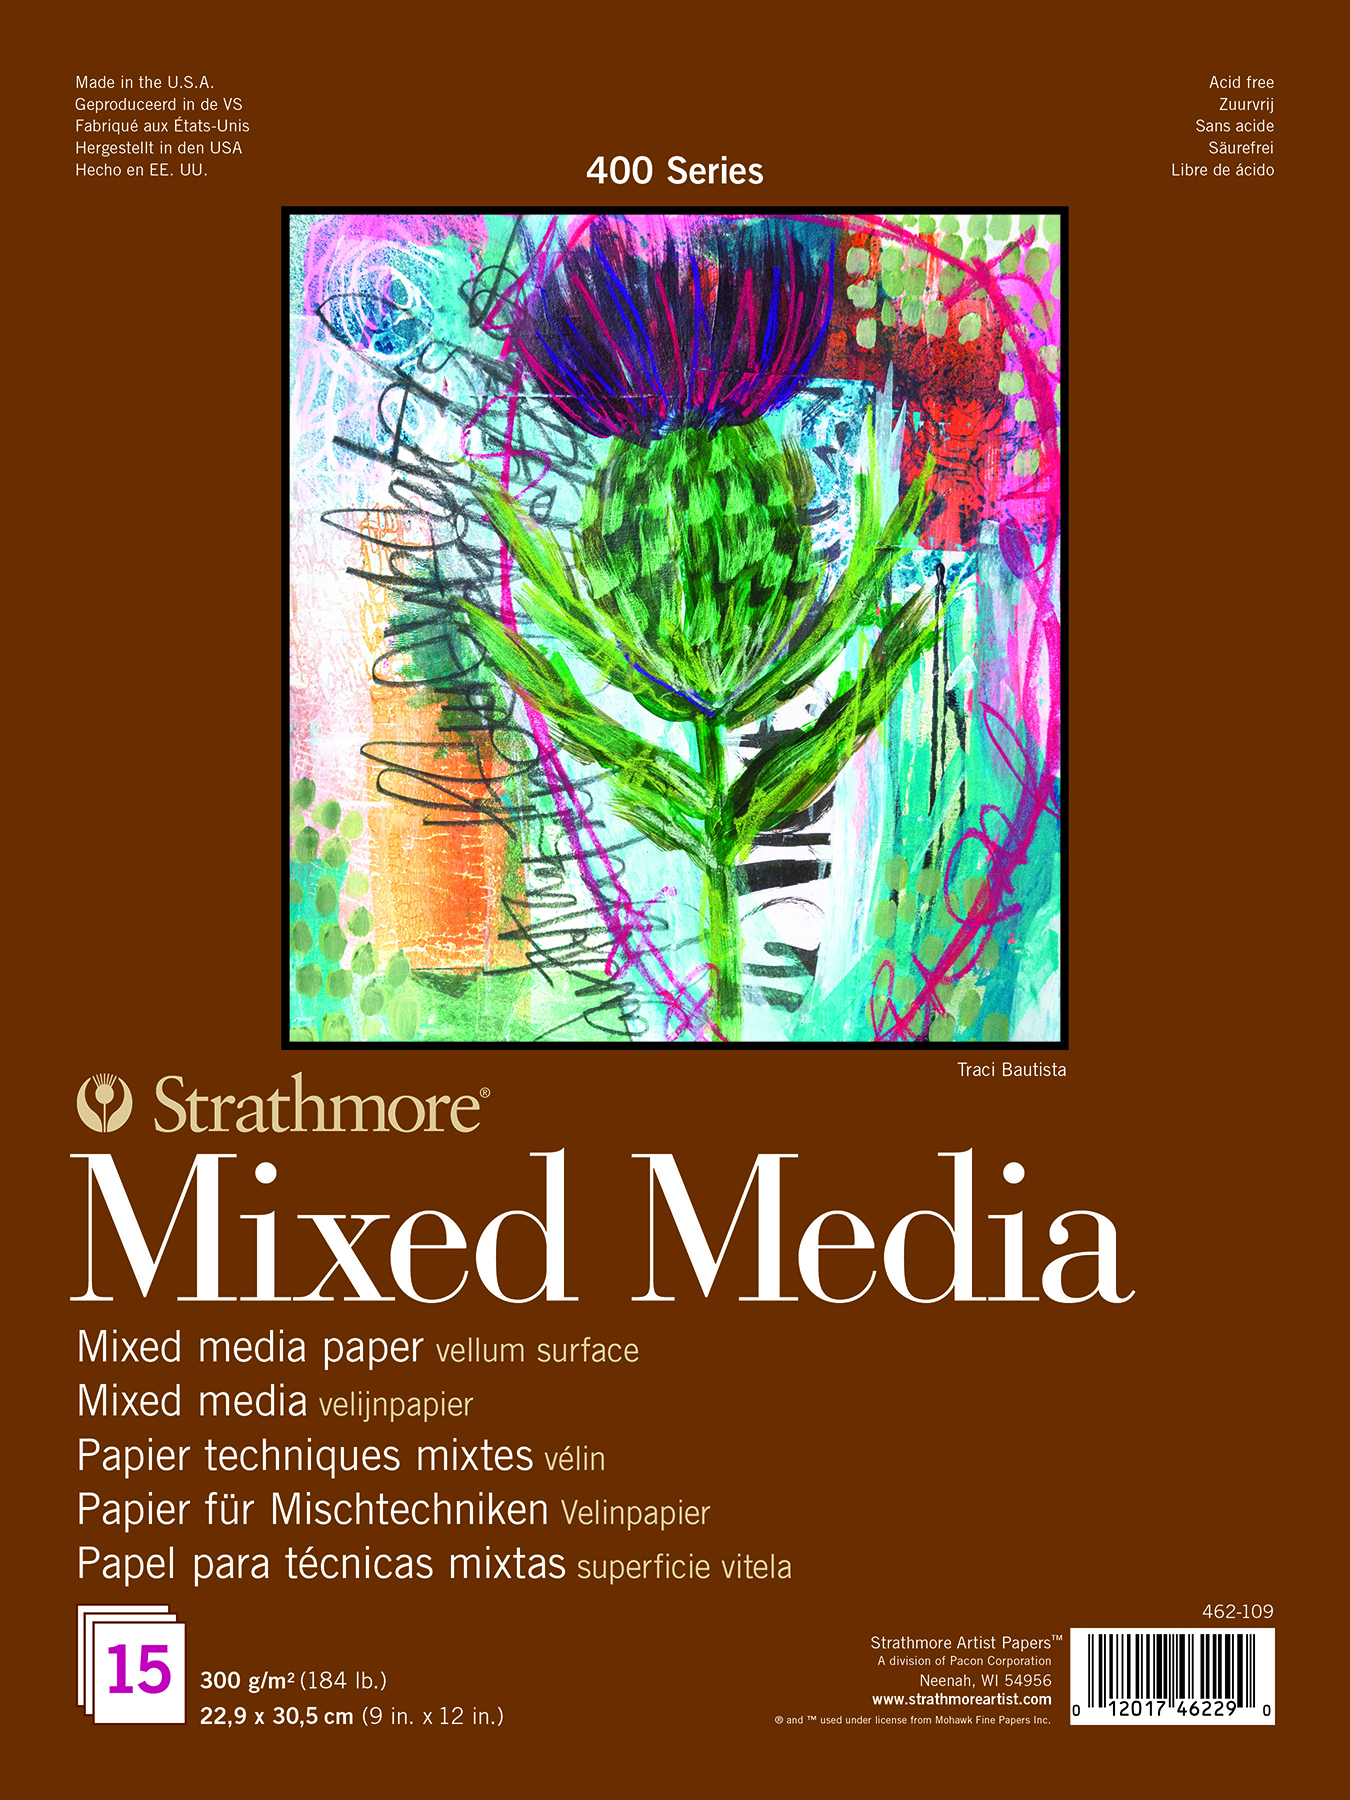 Strathmore and Princeton Come Together - Strathmore Artist Papers